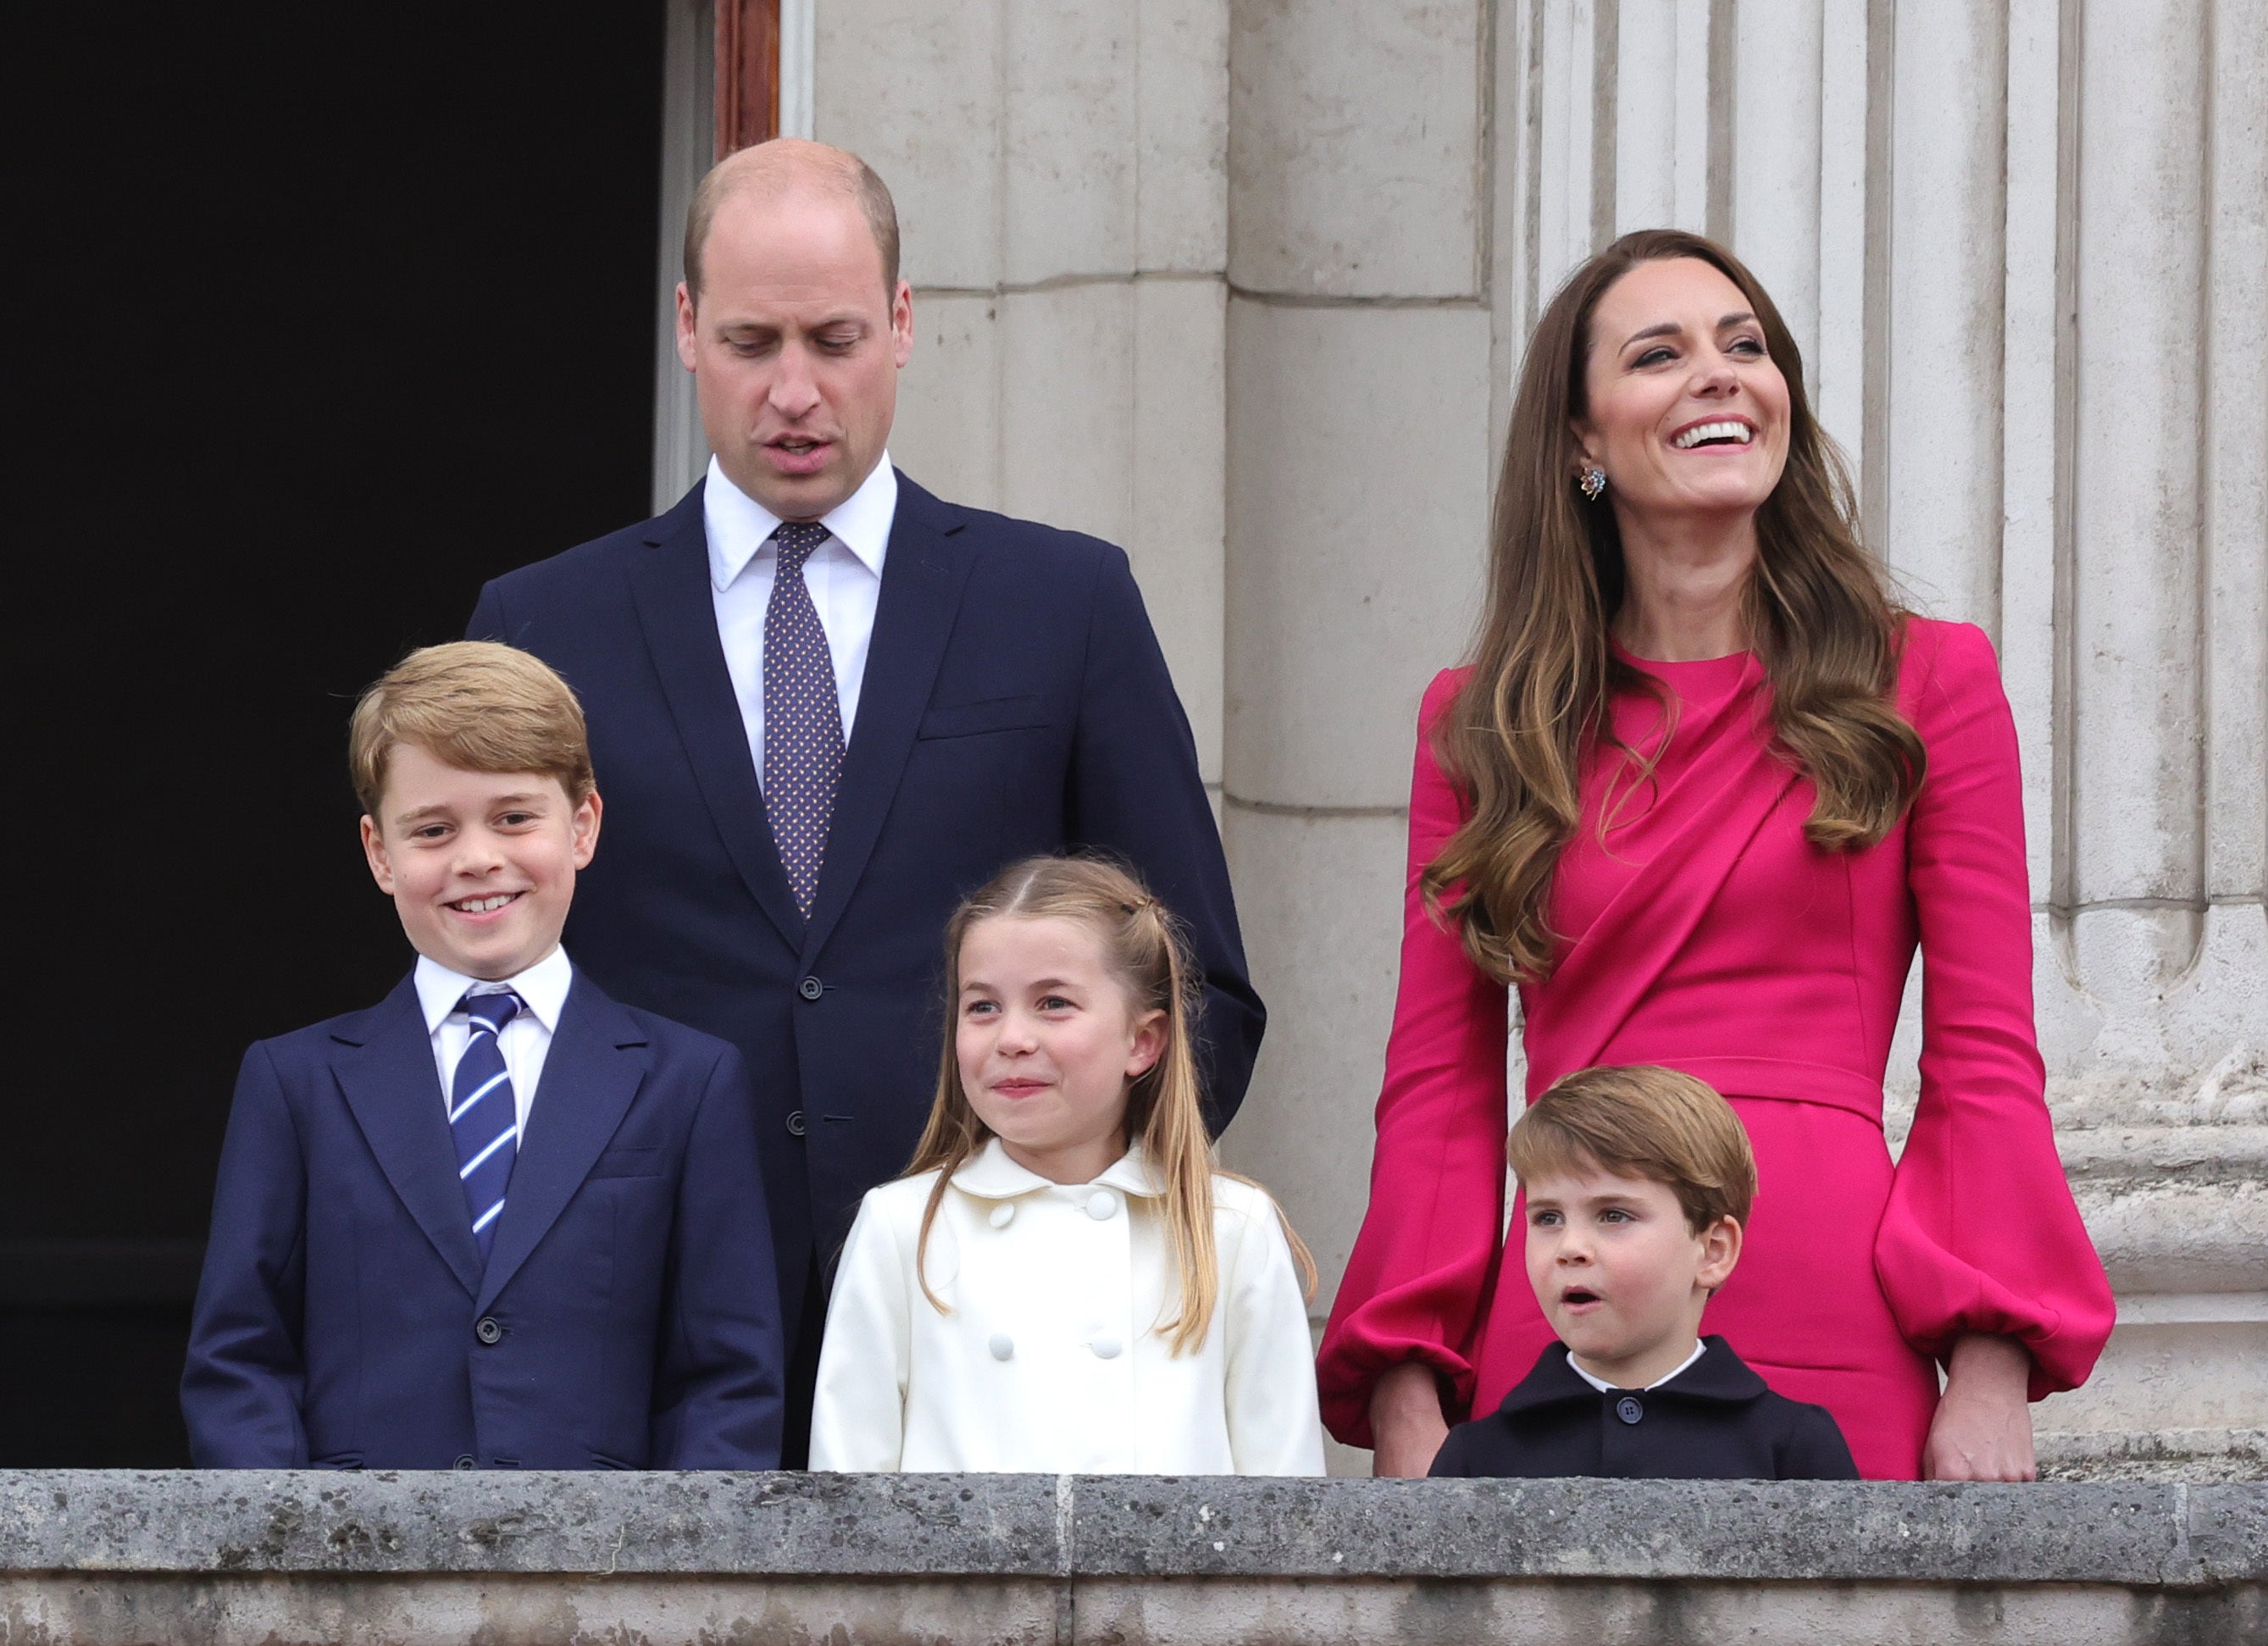 The Cambridge family are reportedly moving to Windsor this summer (Chris Jackson/PA)